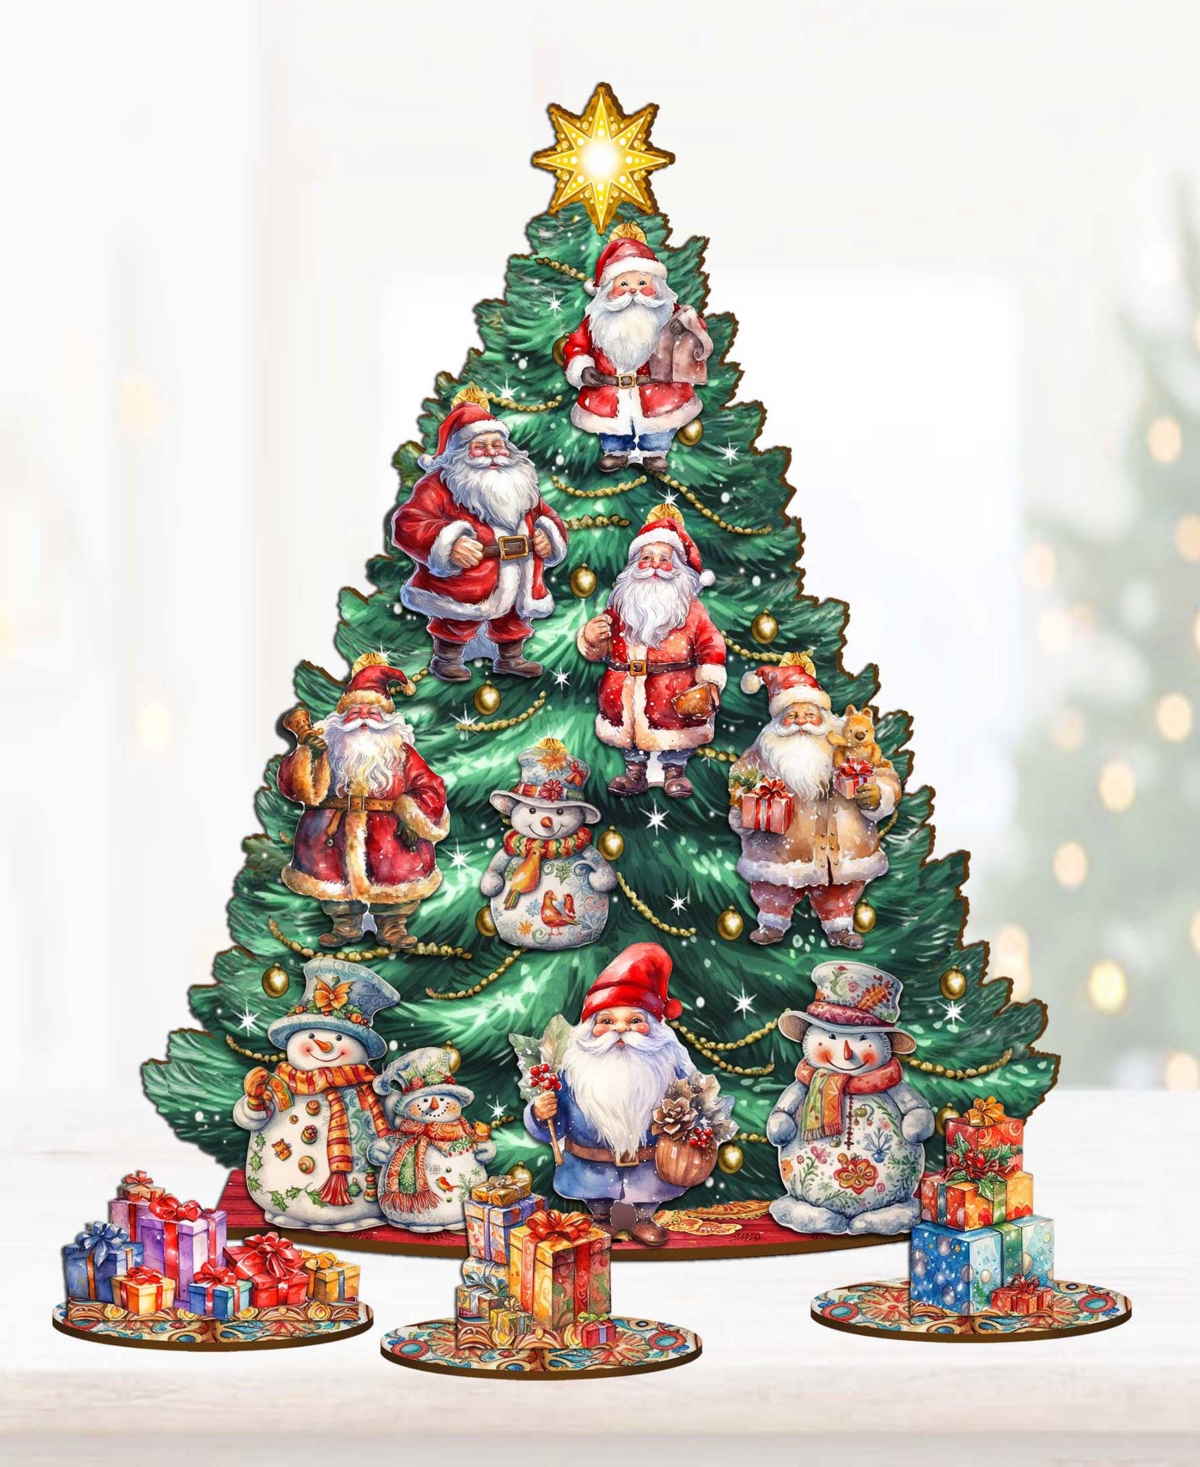 Shop Designocracy Santa Clause Themed Wooden Christmas Tree With Ornaments Set Of 13 G. Debrekht In Multi Color